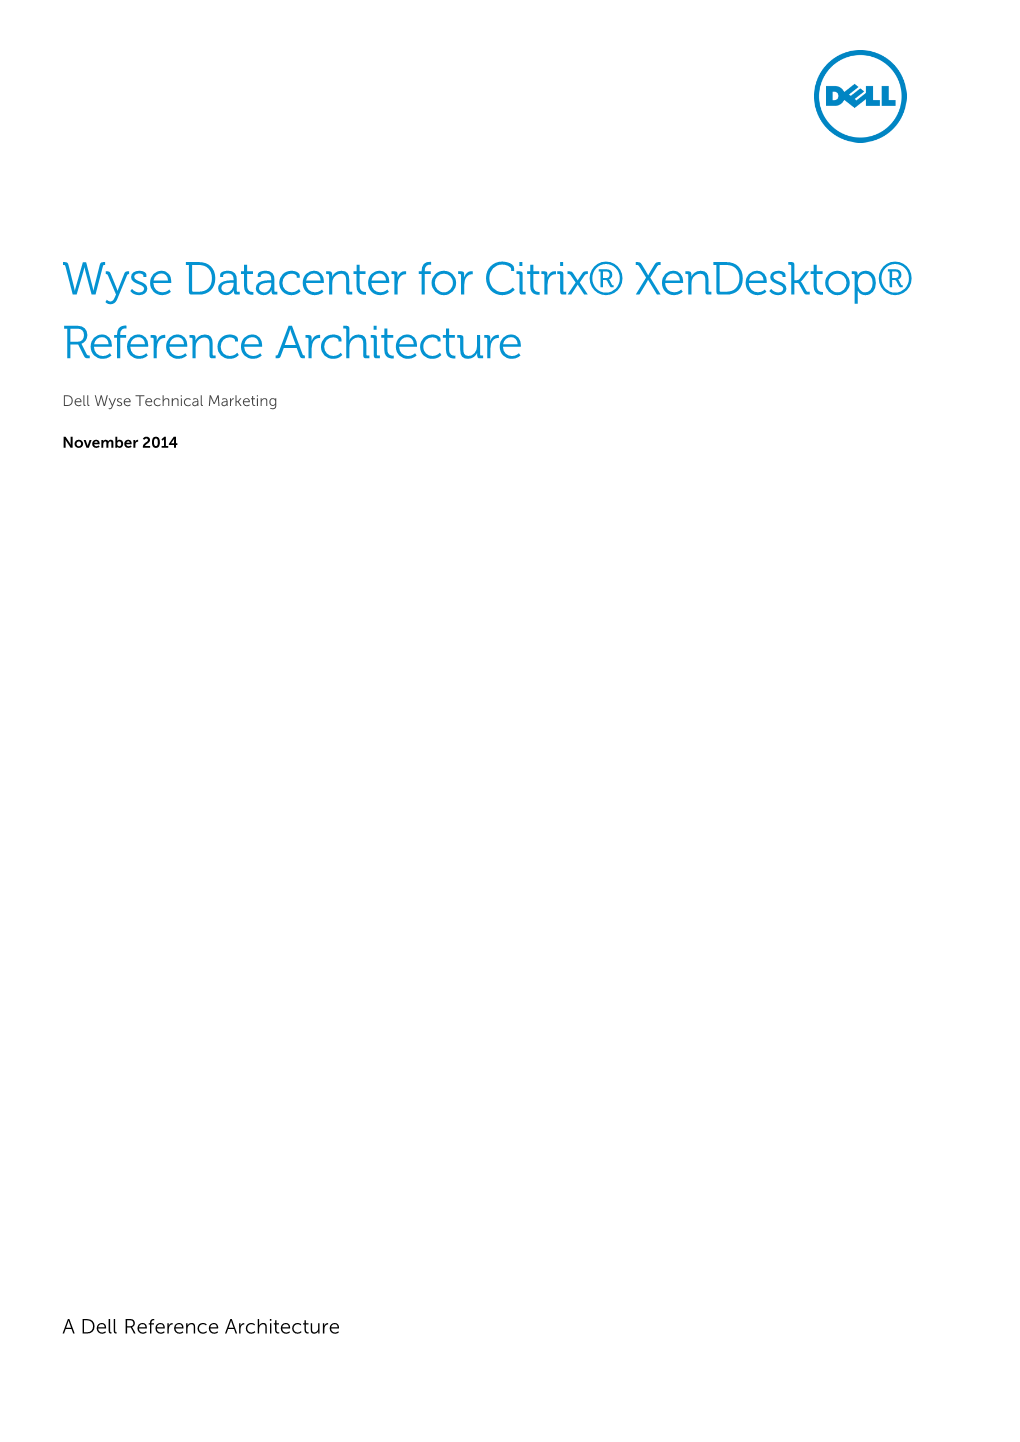 Wyse Datacenter for Citrix® Xendesktop® Reference Architecture